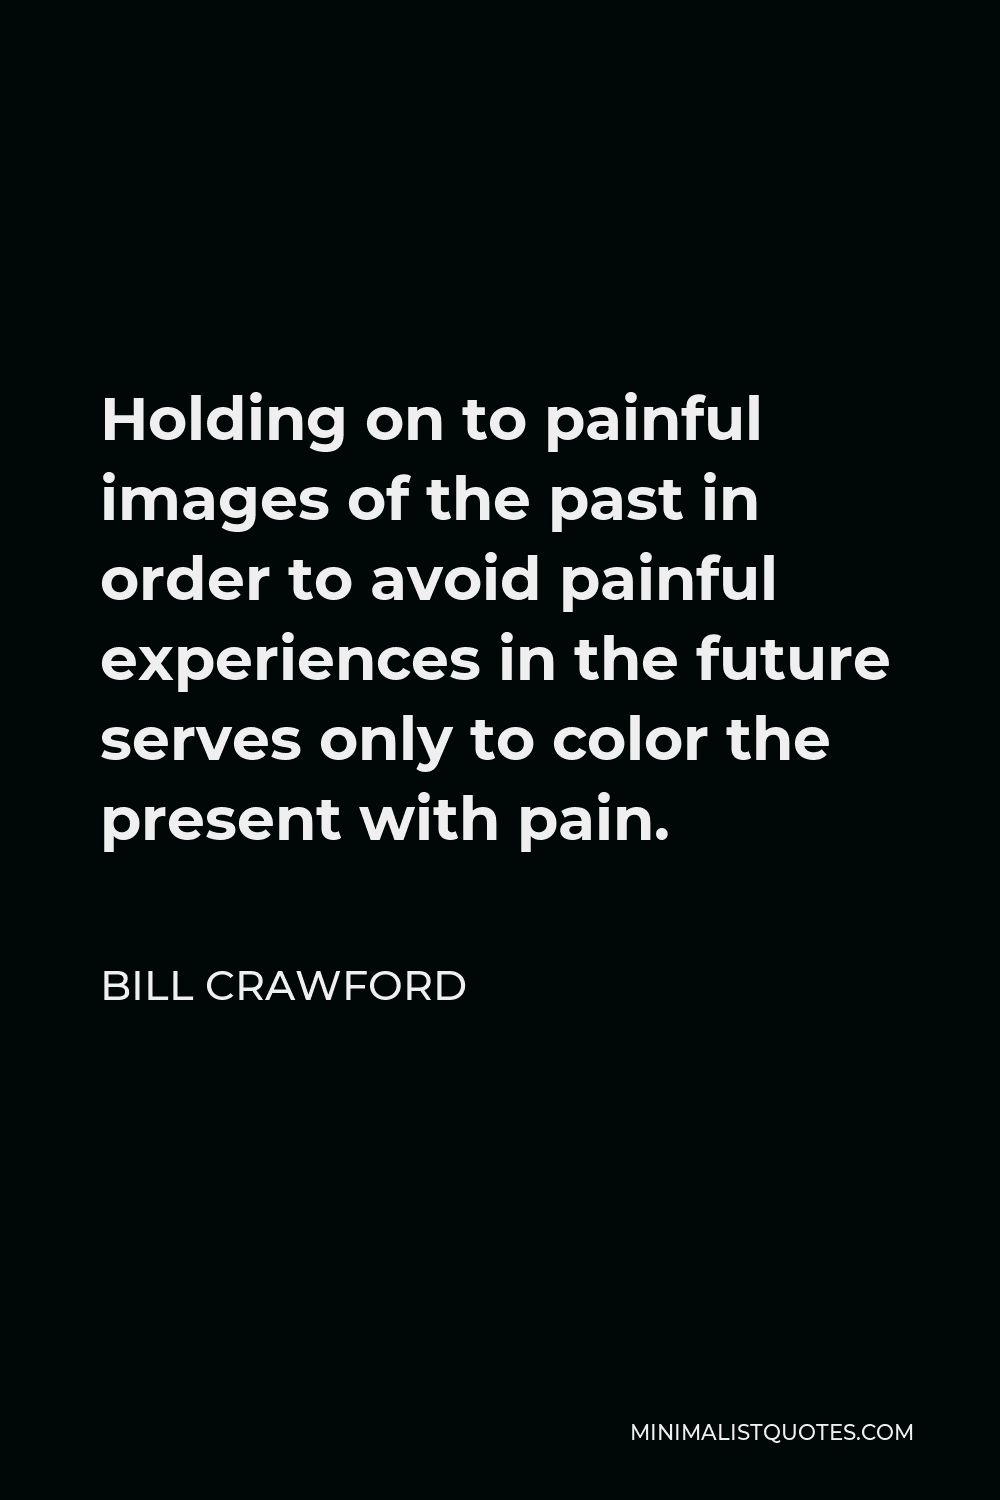 Bill Crawford Quote - Holding on to painful images of the past in order to avoid painful experiences in the future serves only to color the present with pain.